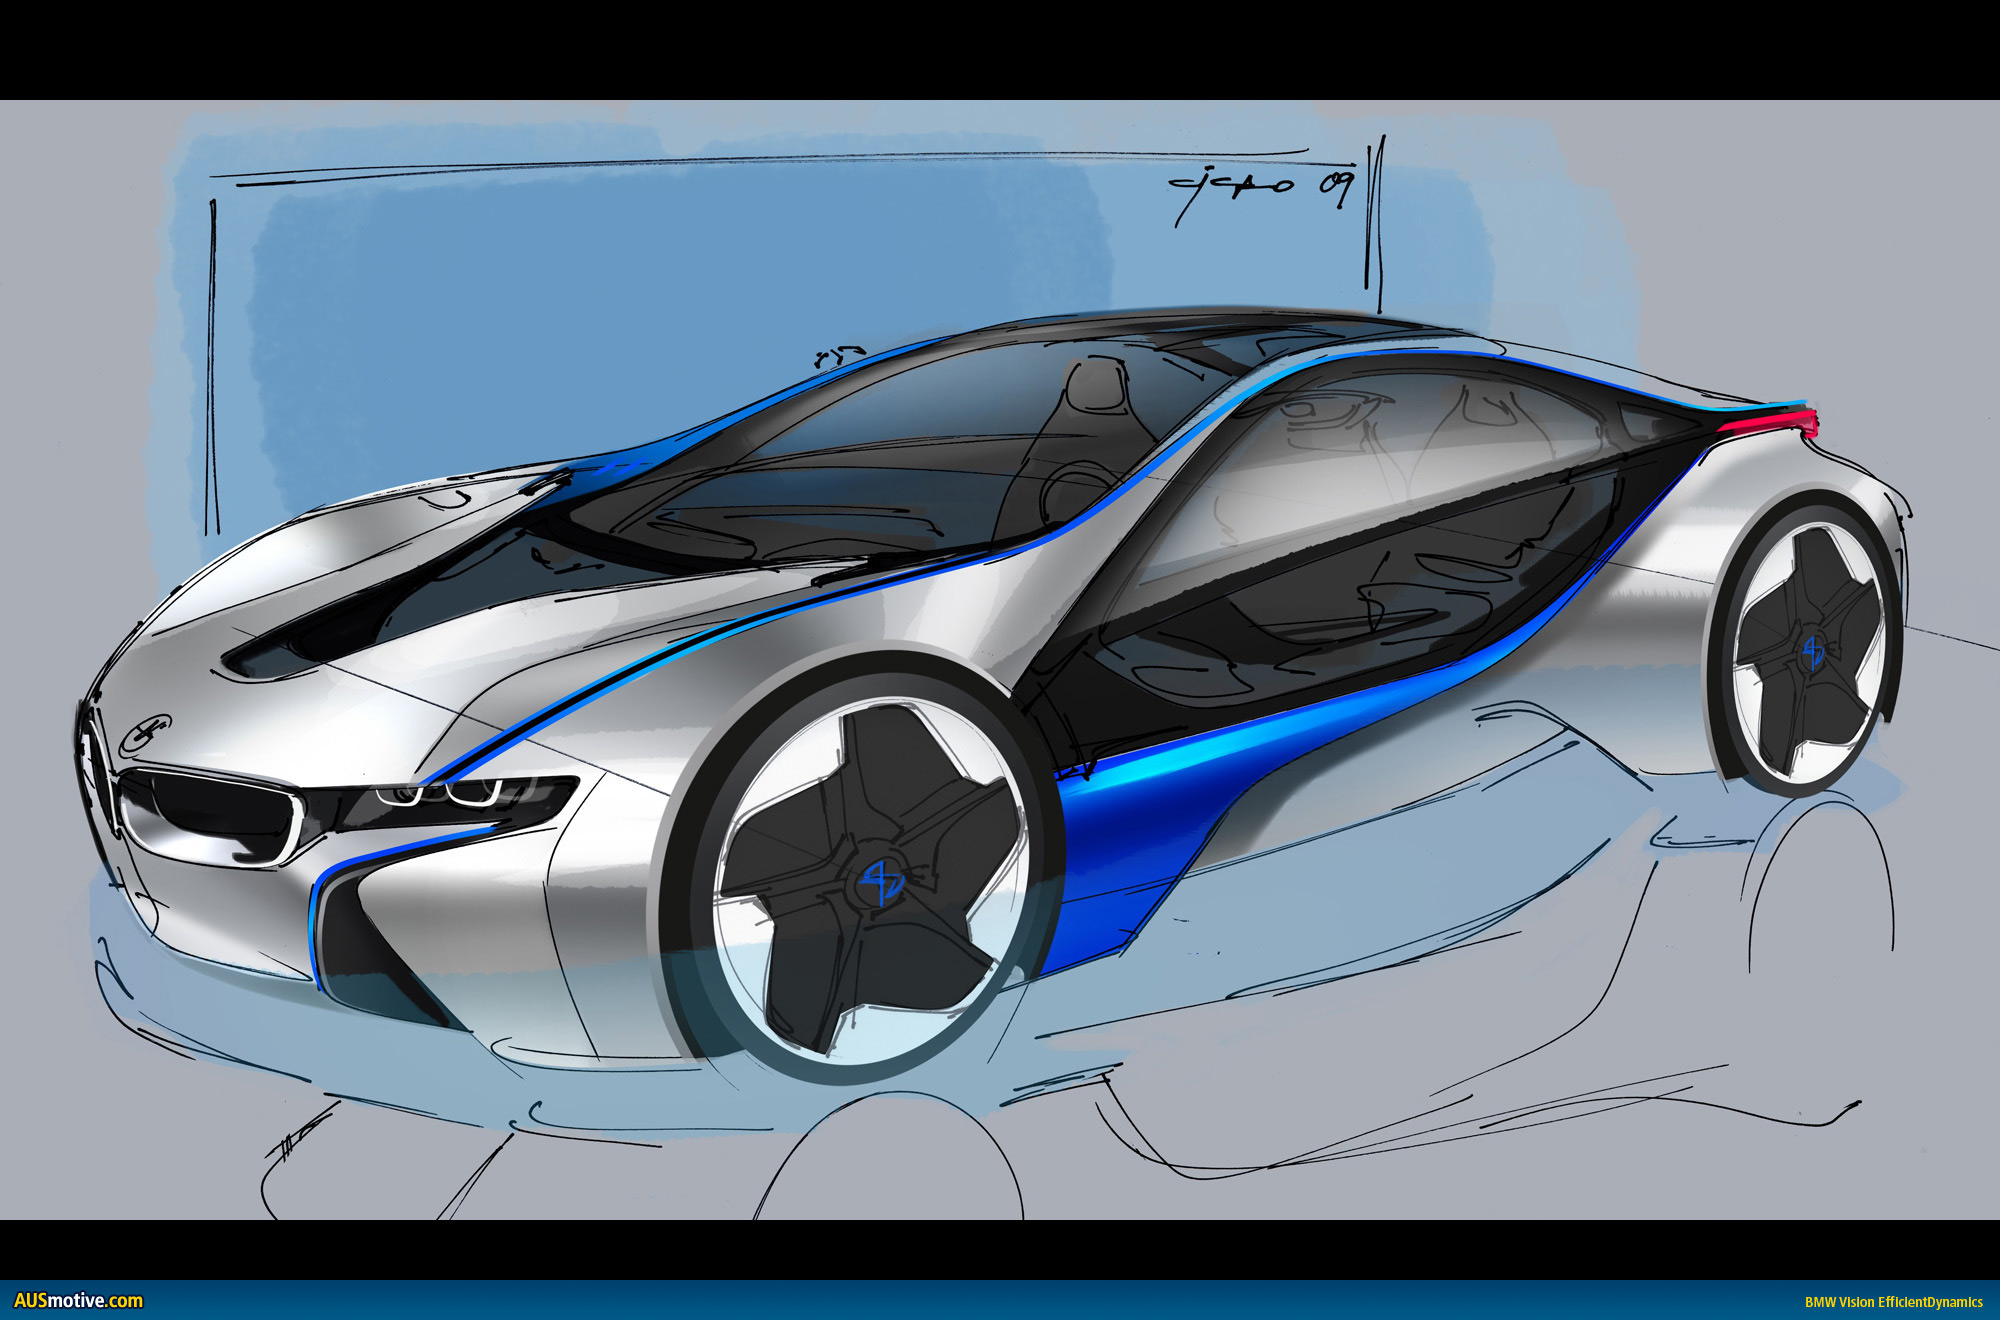 How much is the bmw vision efficientdynamics #7